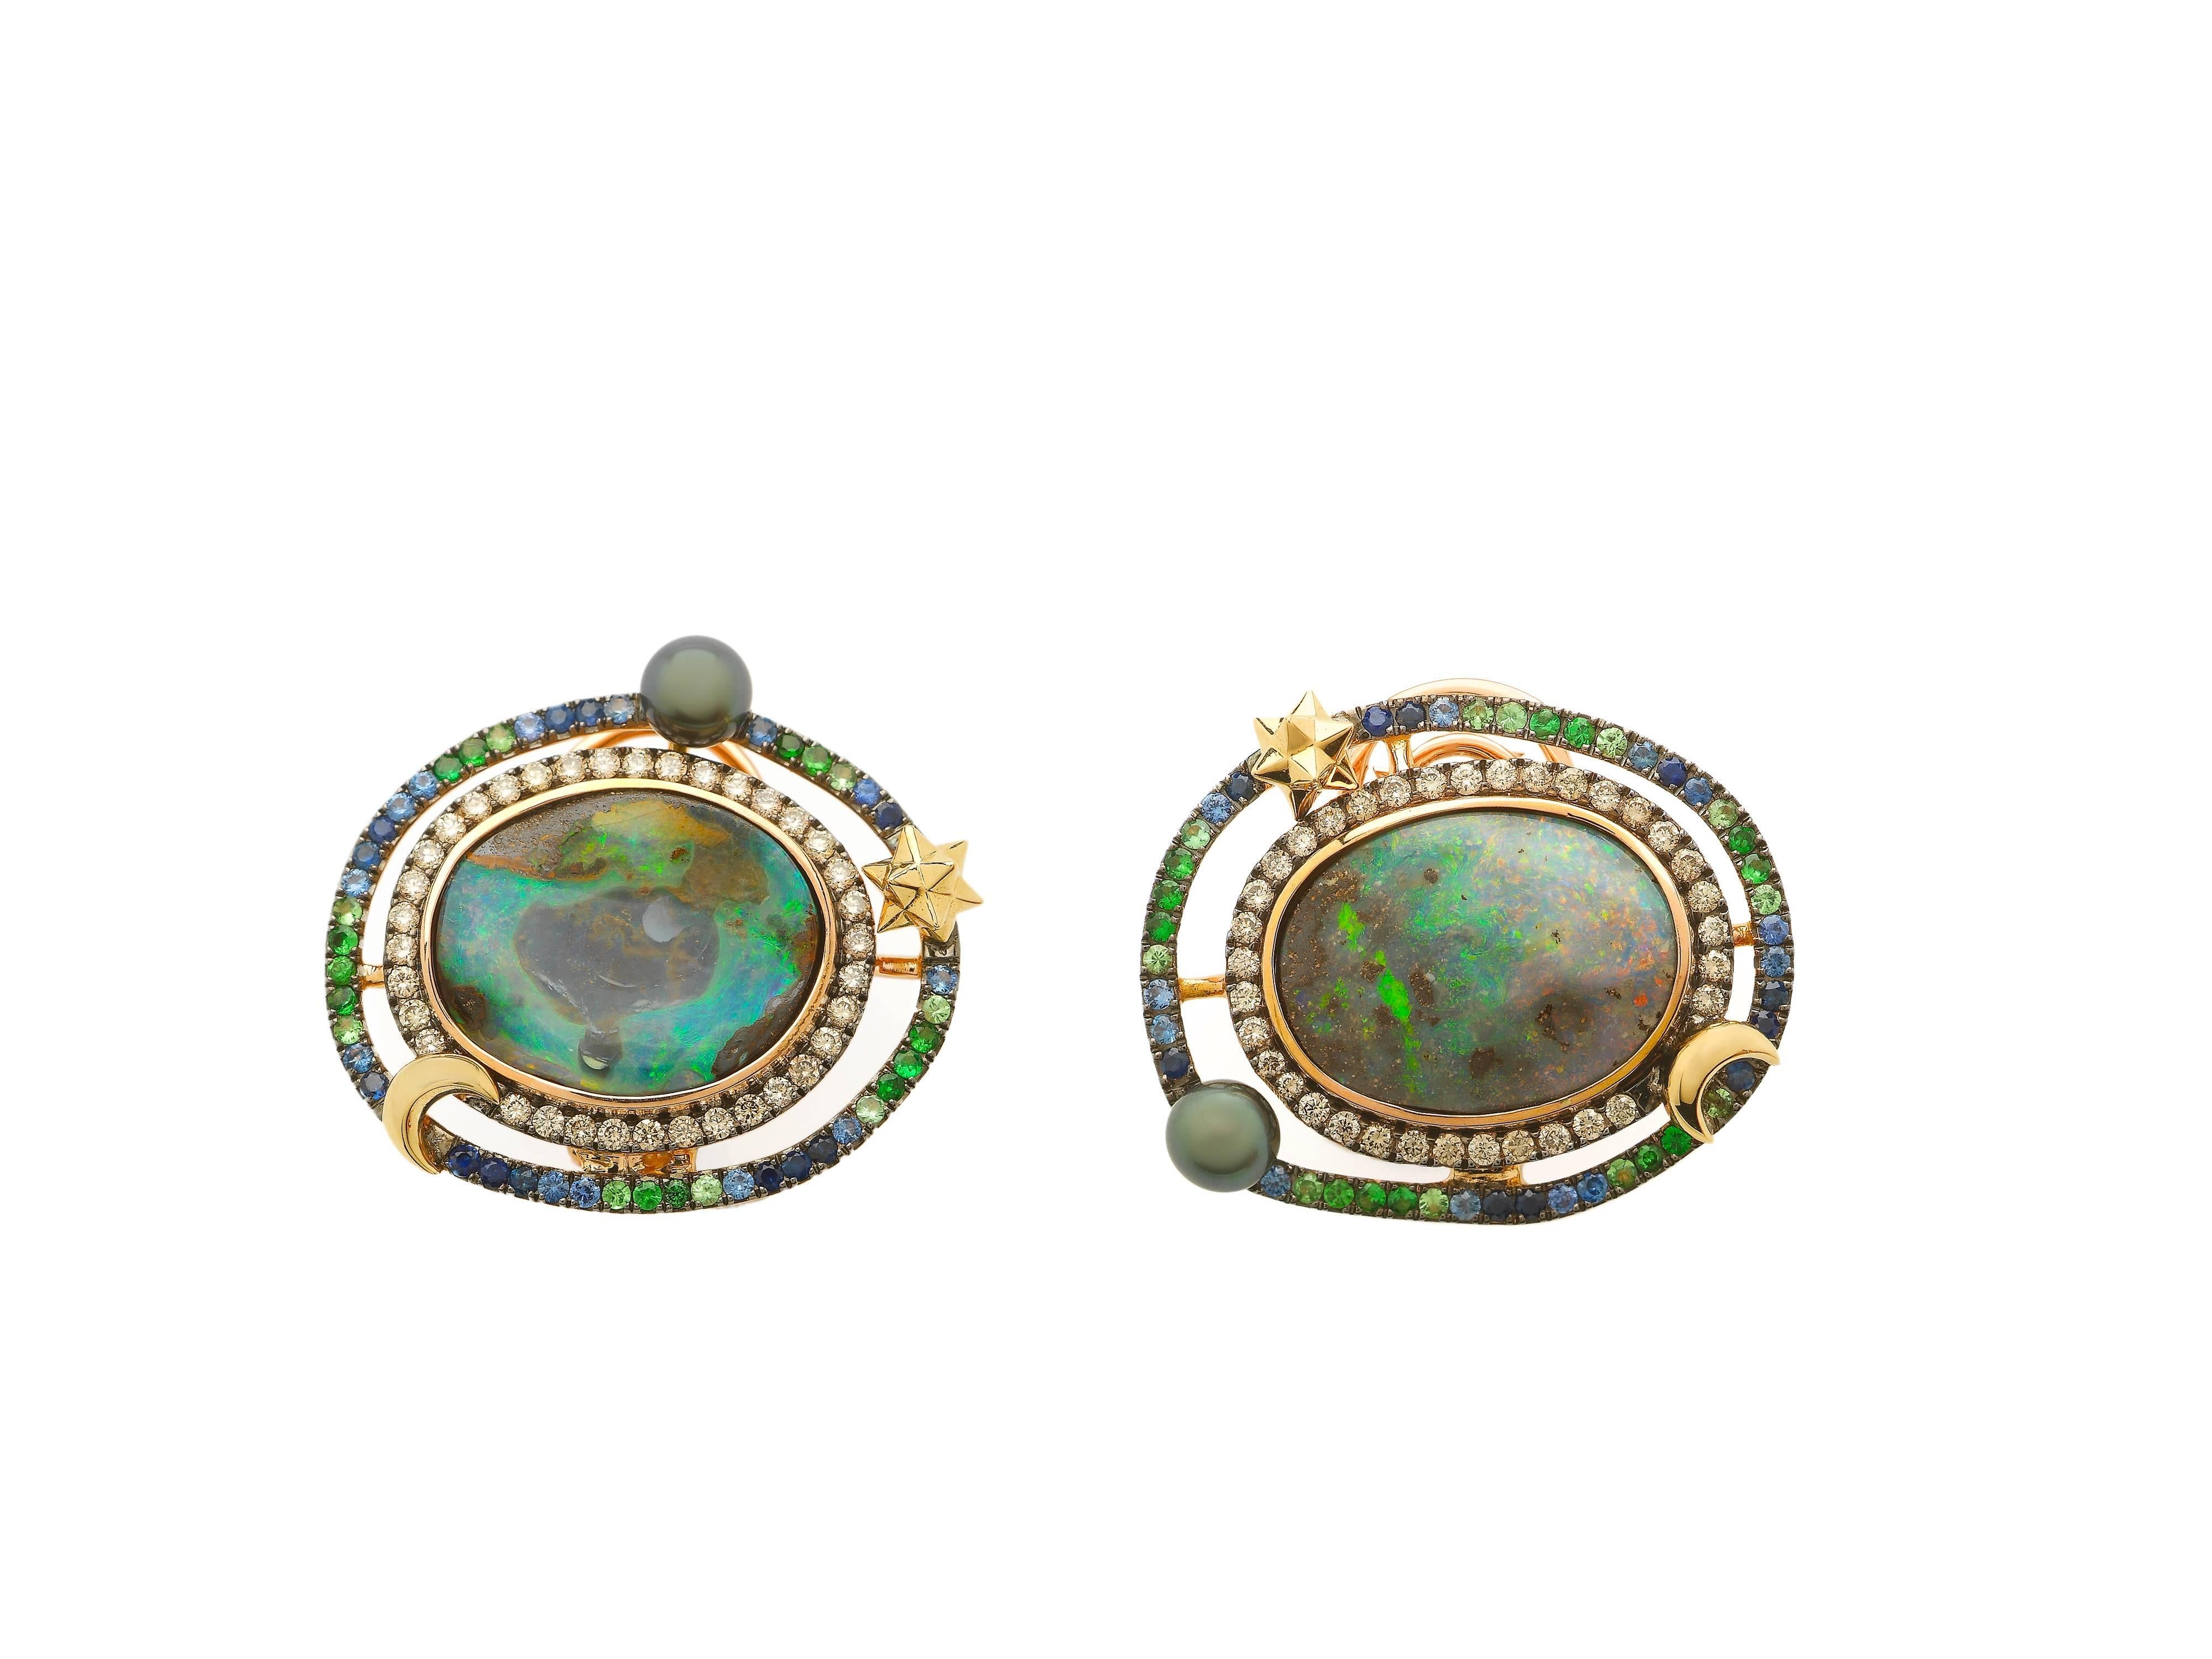 The Opal Orb Earrings, by Bibi van der Velden, are made of 18k Rose and Yellow Gold and include beautiful Boulder Opals, surrounded by orbs of Brown and White Diamonds, Blue Sapphires, Tsavorites and Keshi pearls. The earrings include secure Omega